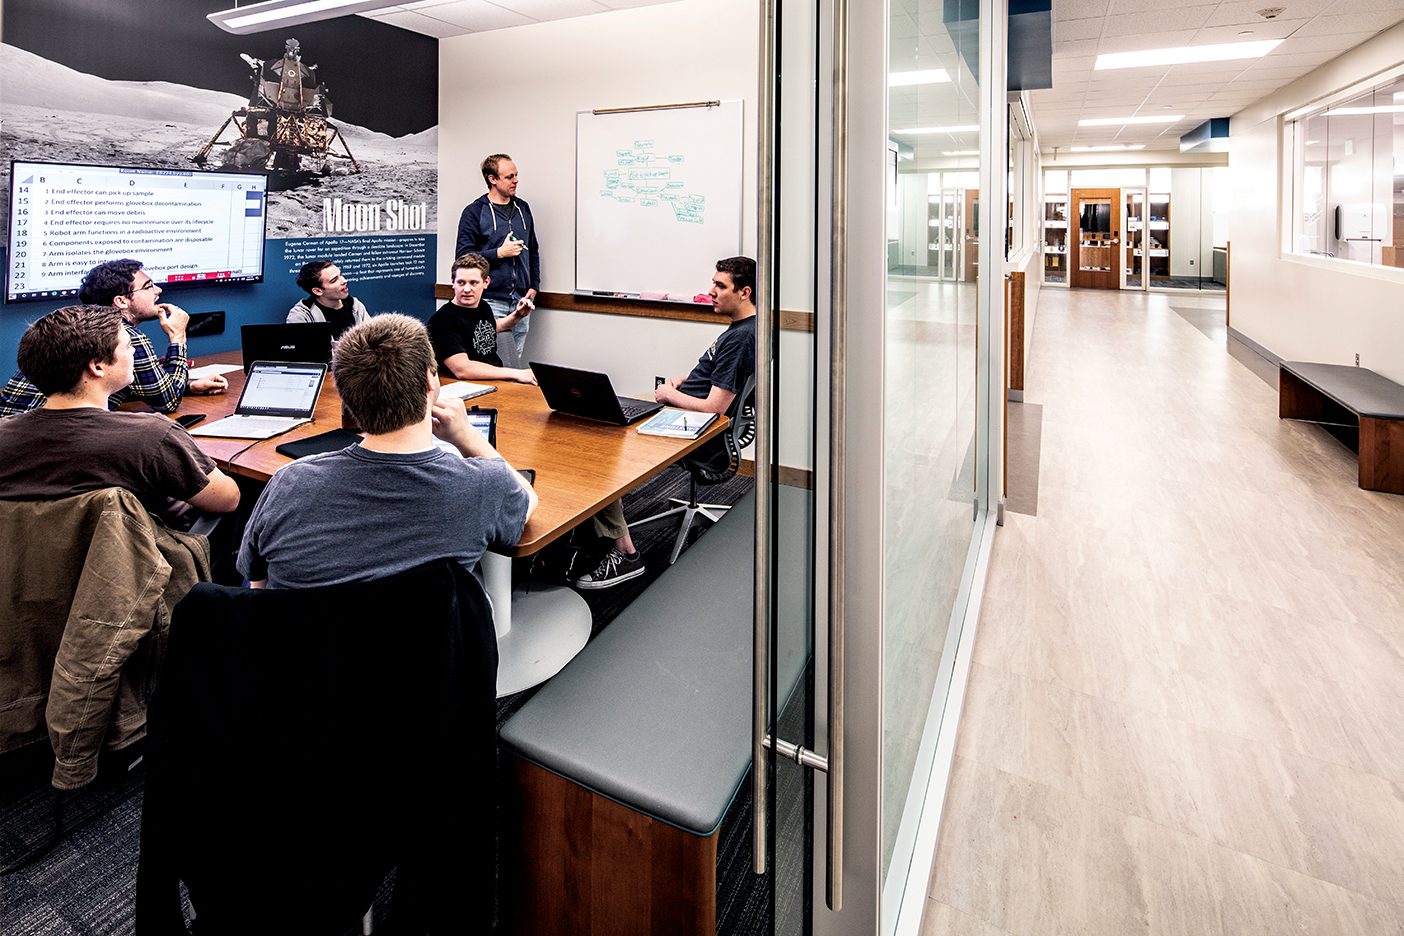 A team study room in BYU's new Engineering Building.